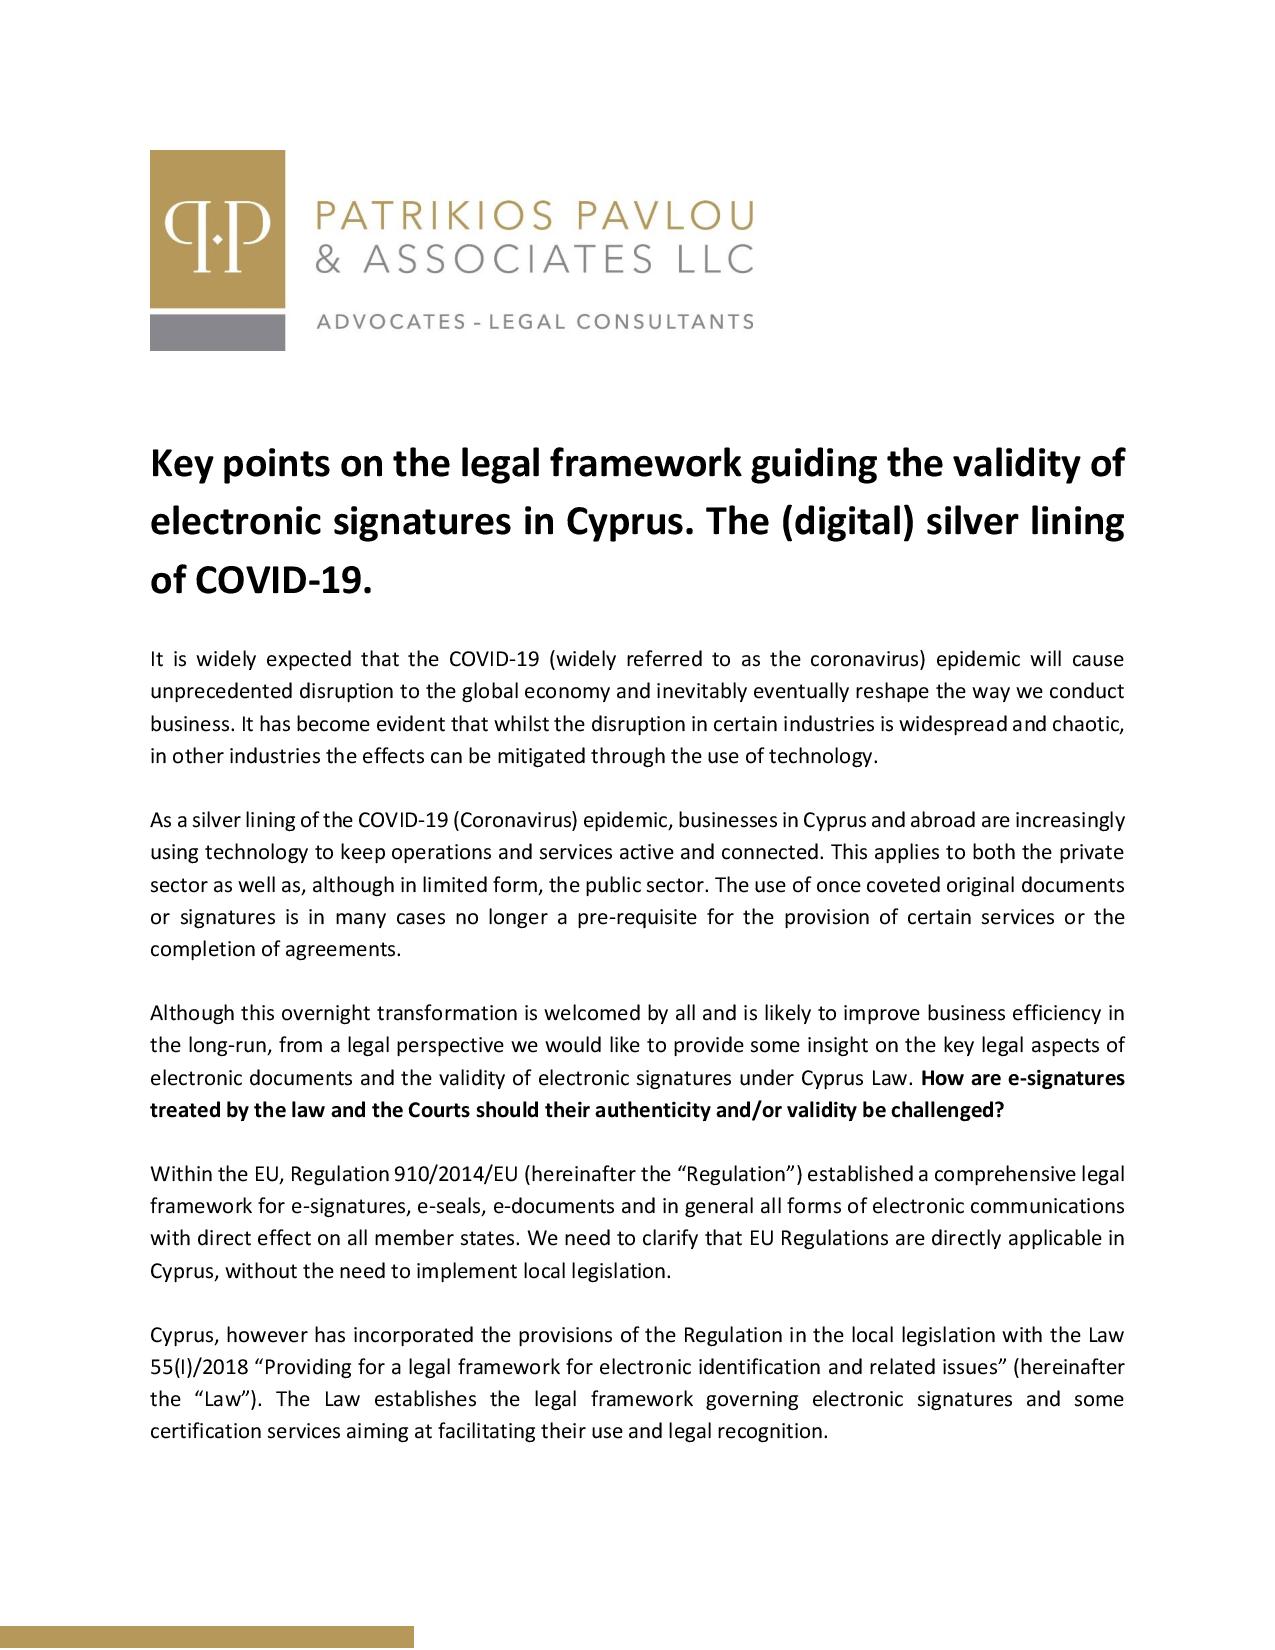 Key points on the legal framework guiding the validity of electronic signatures in Cyprus. The (digital) silver lining of COVID-19.